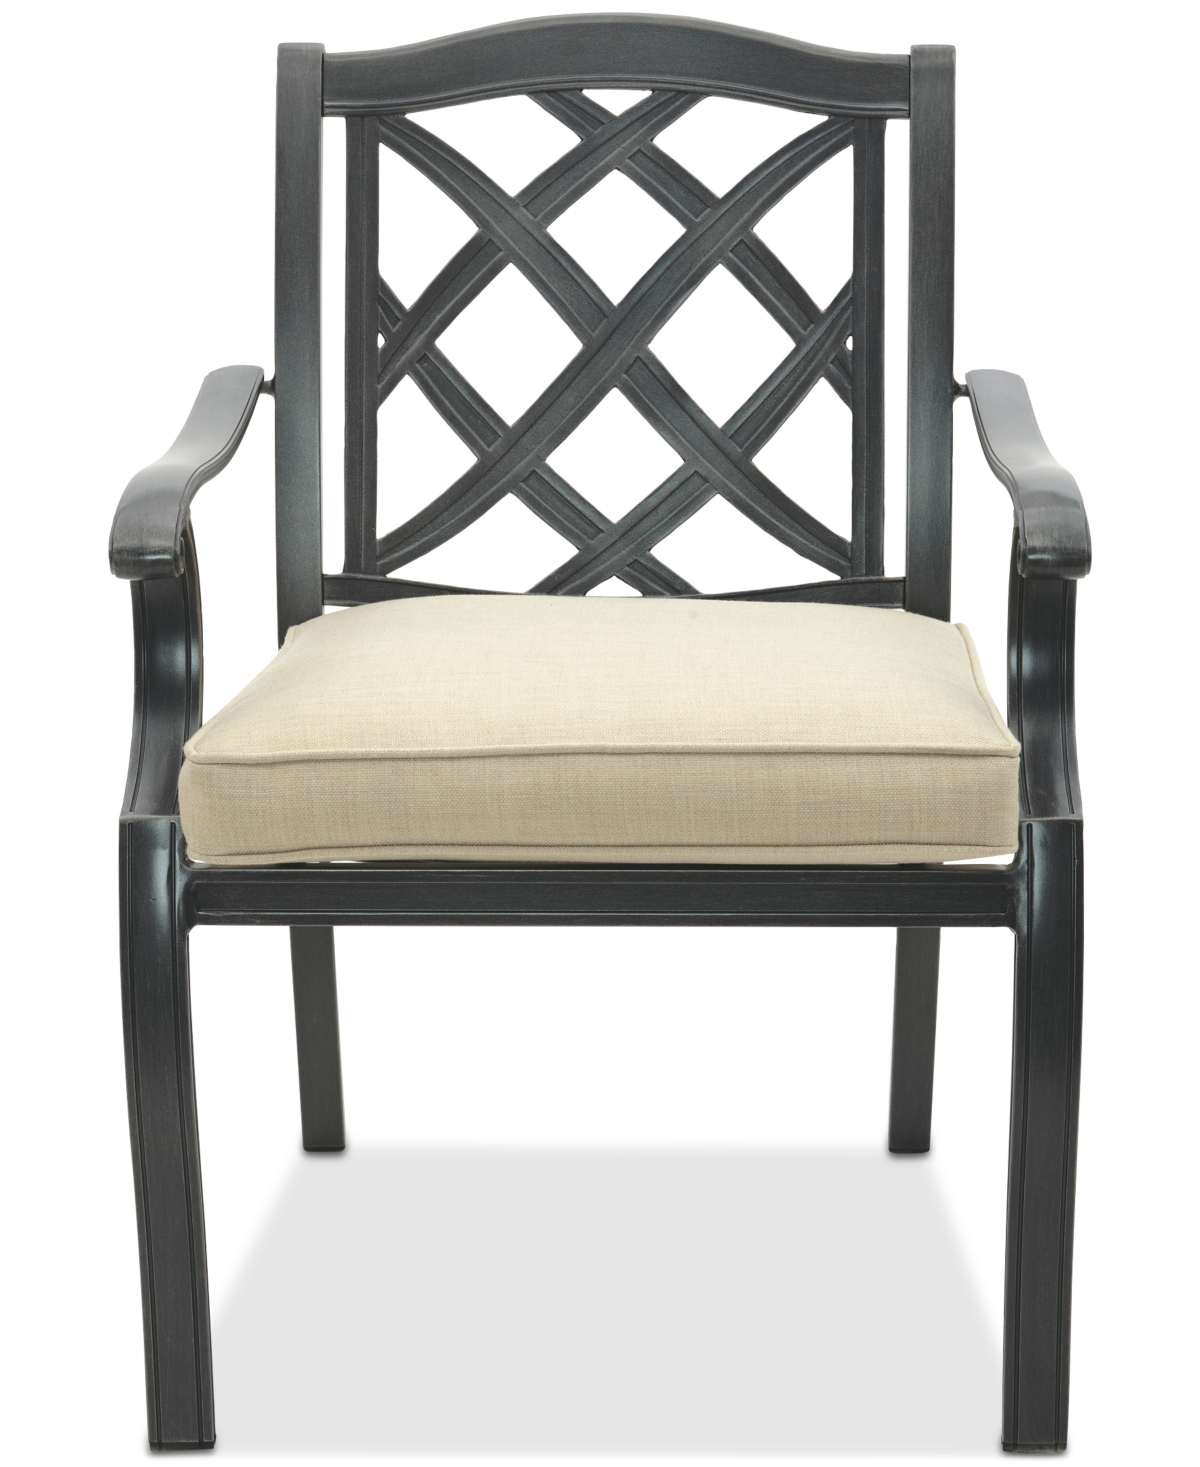 Agio Wythburn Mix And Match Lattice Outdoor Dining Chair In Straw Natural,bronze Finish